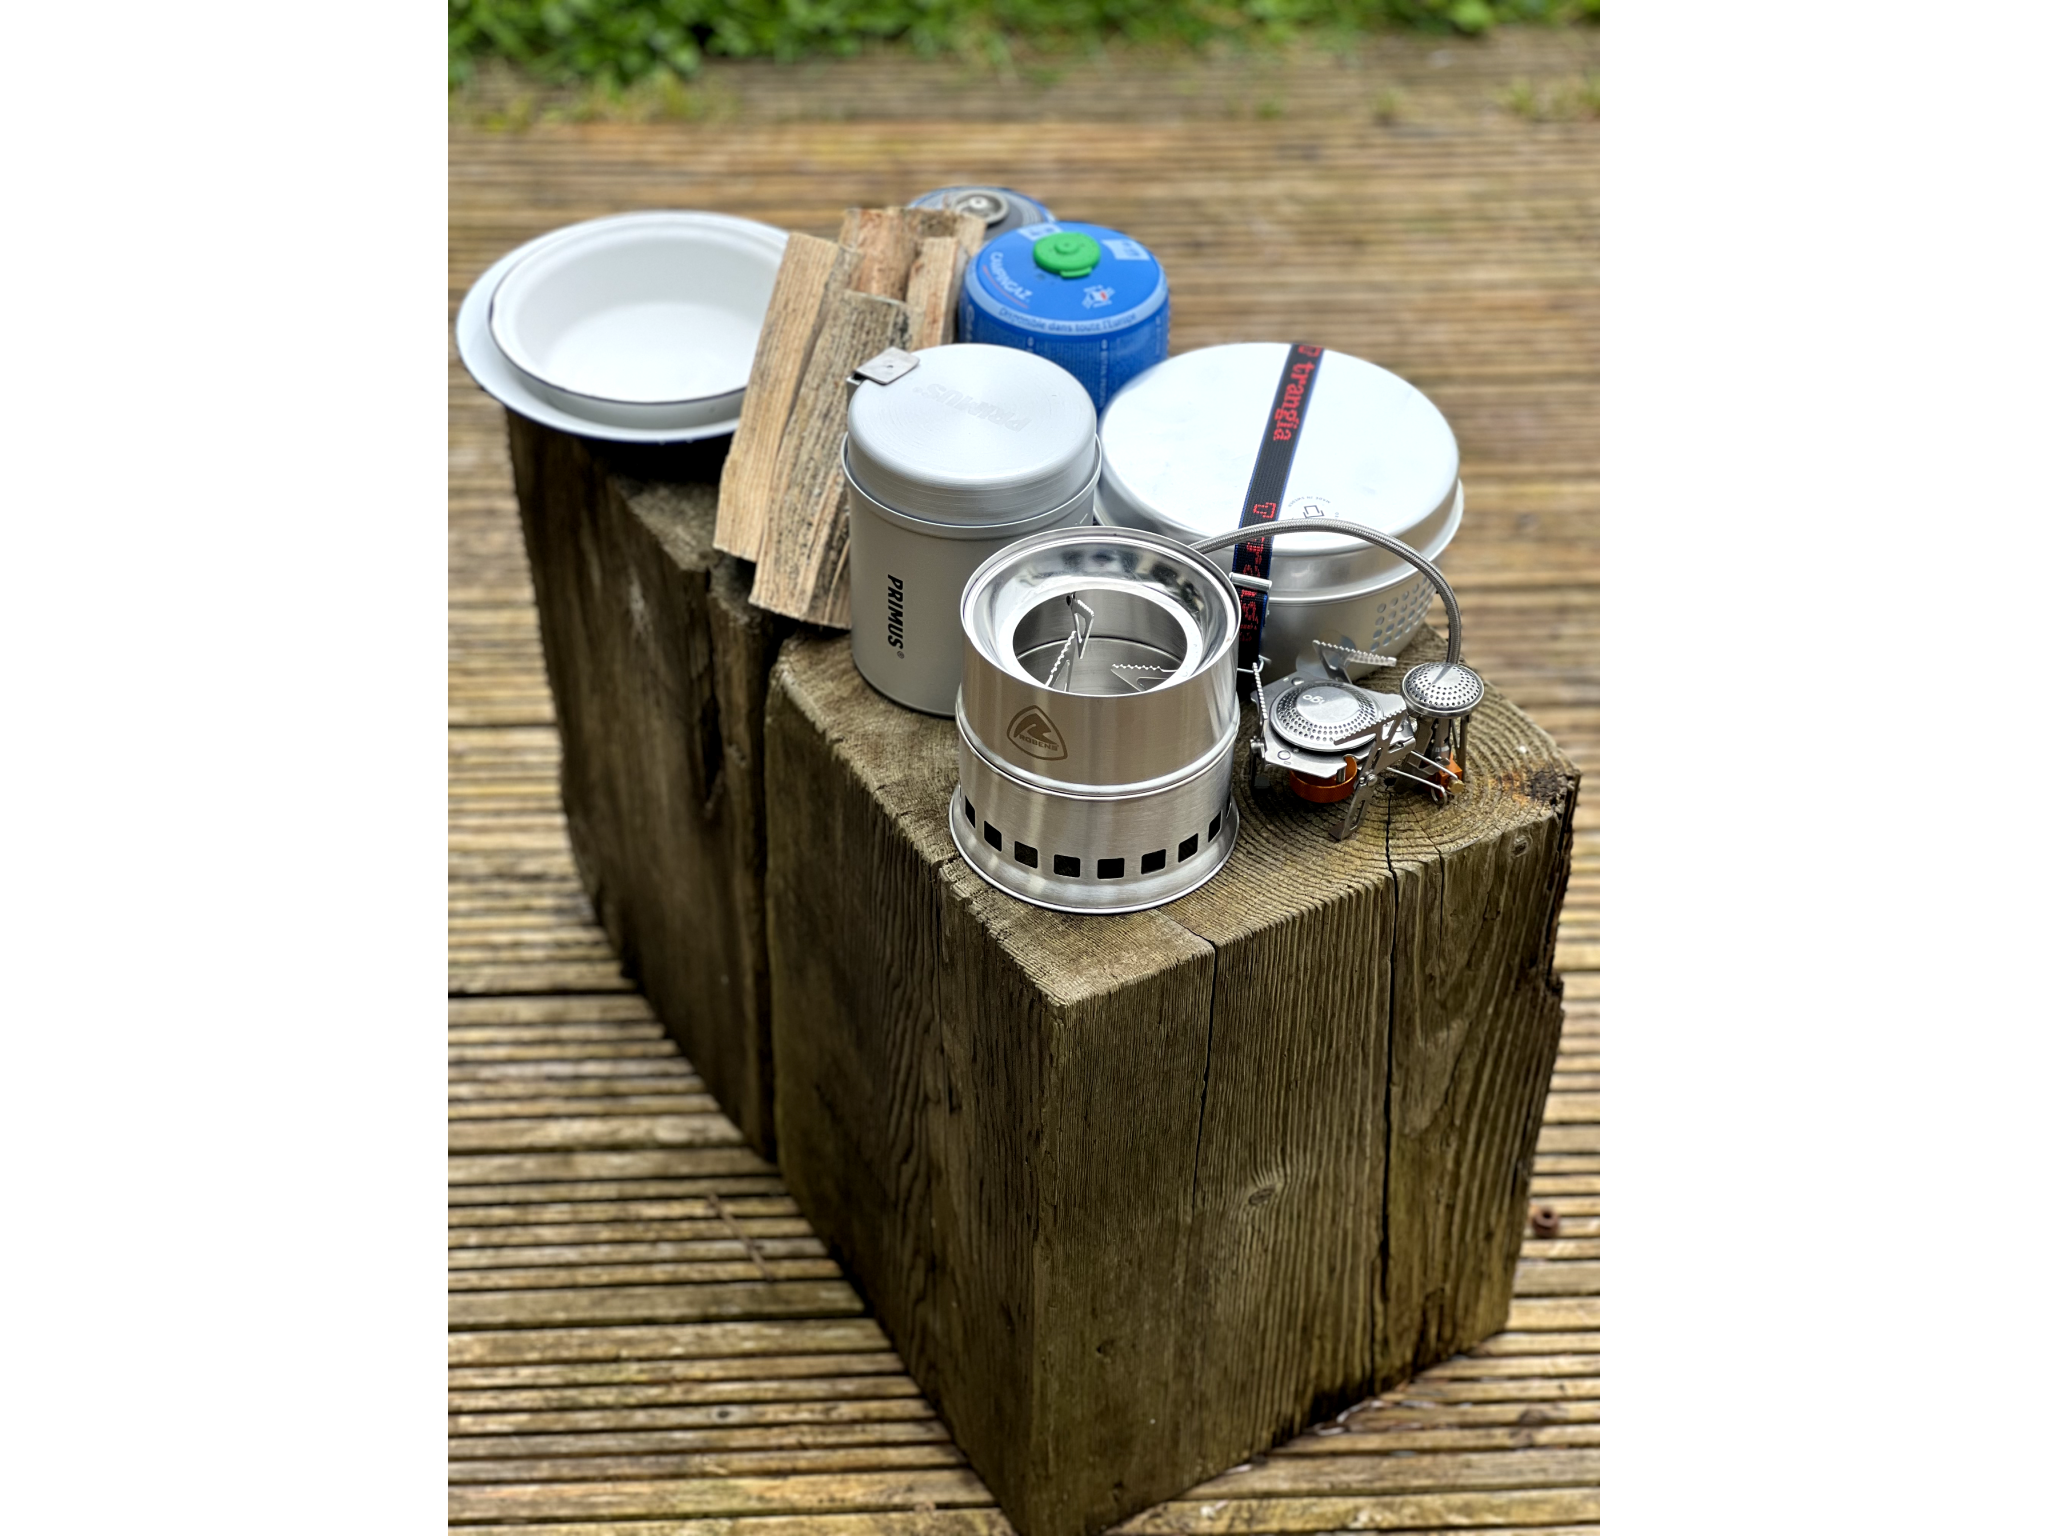 A selection of the camping stoves we tested